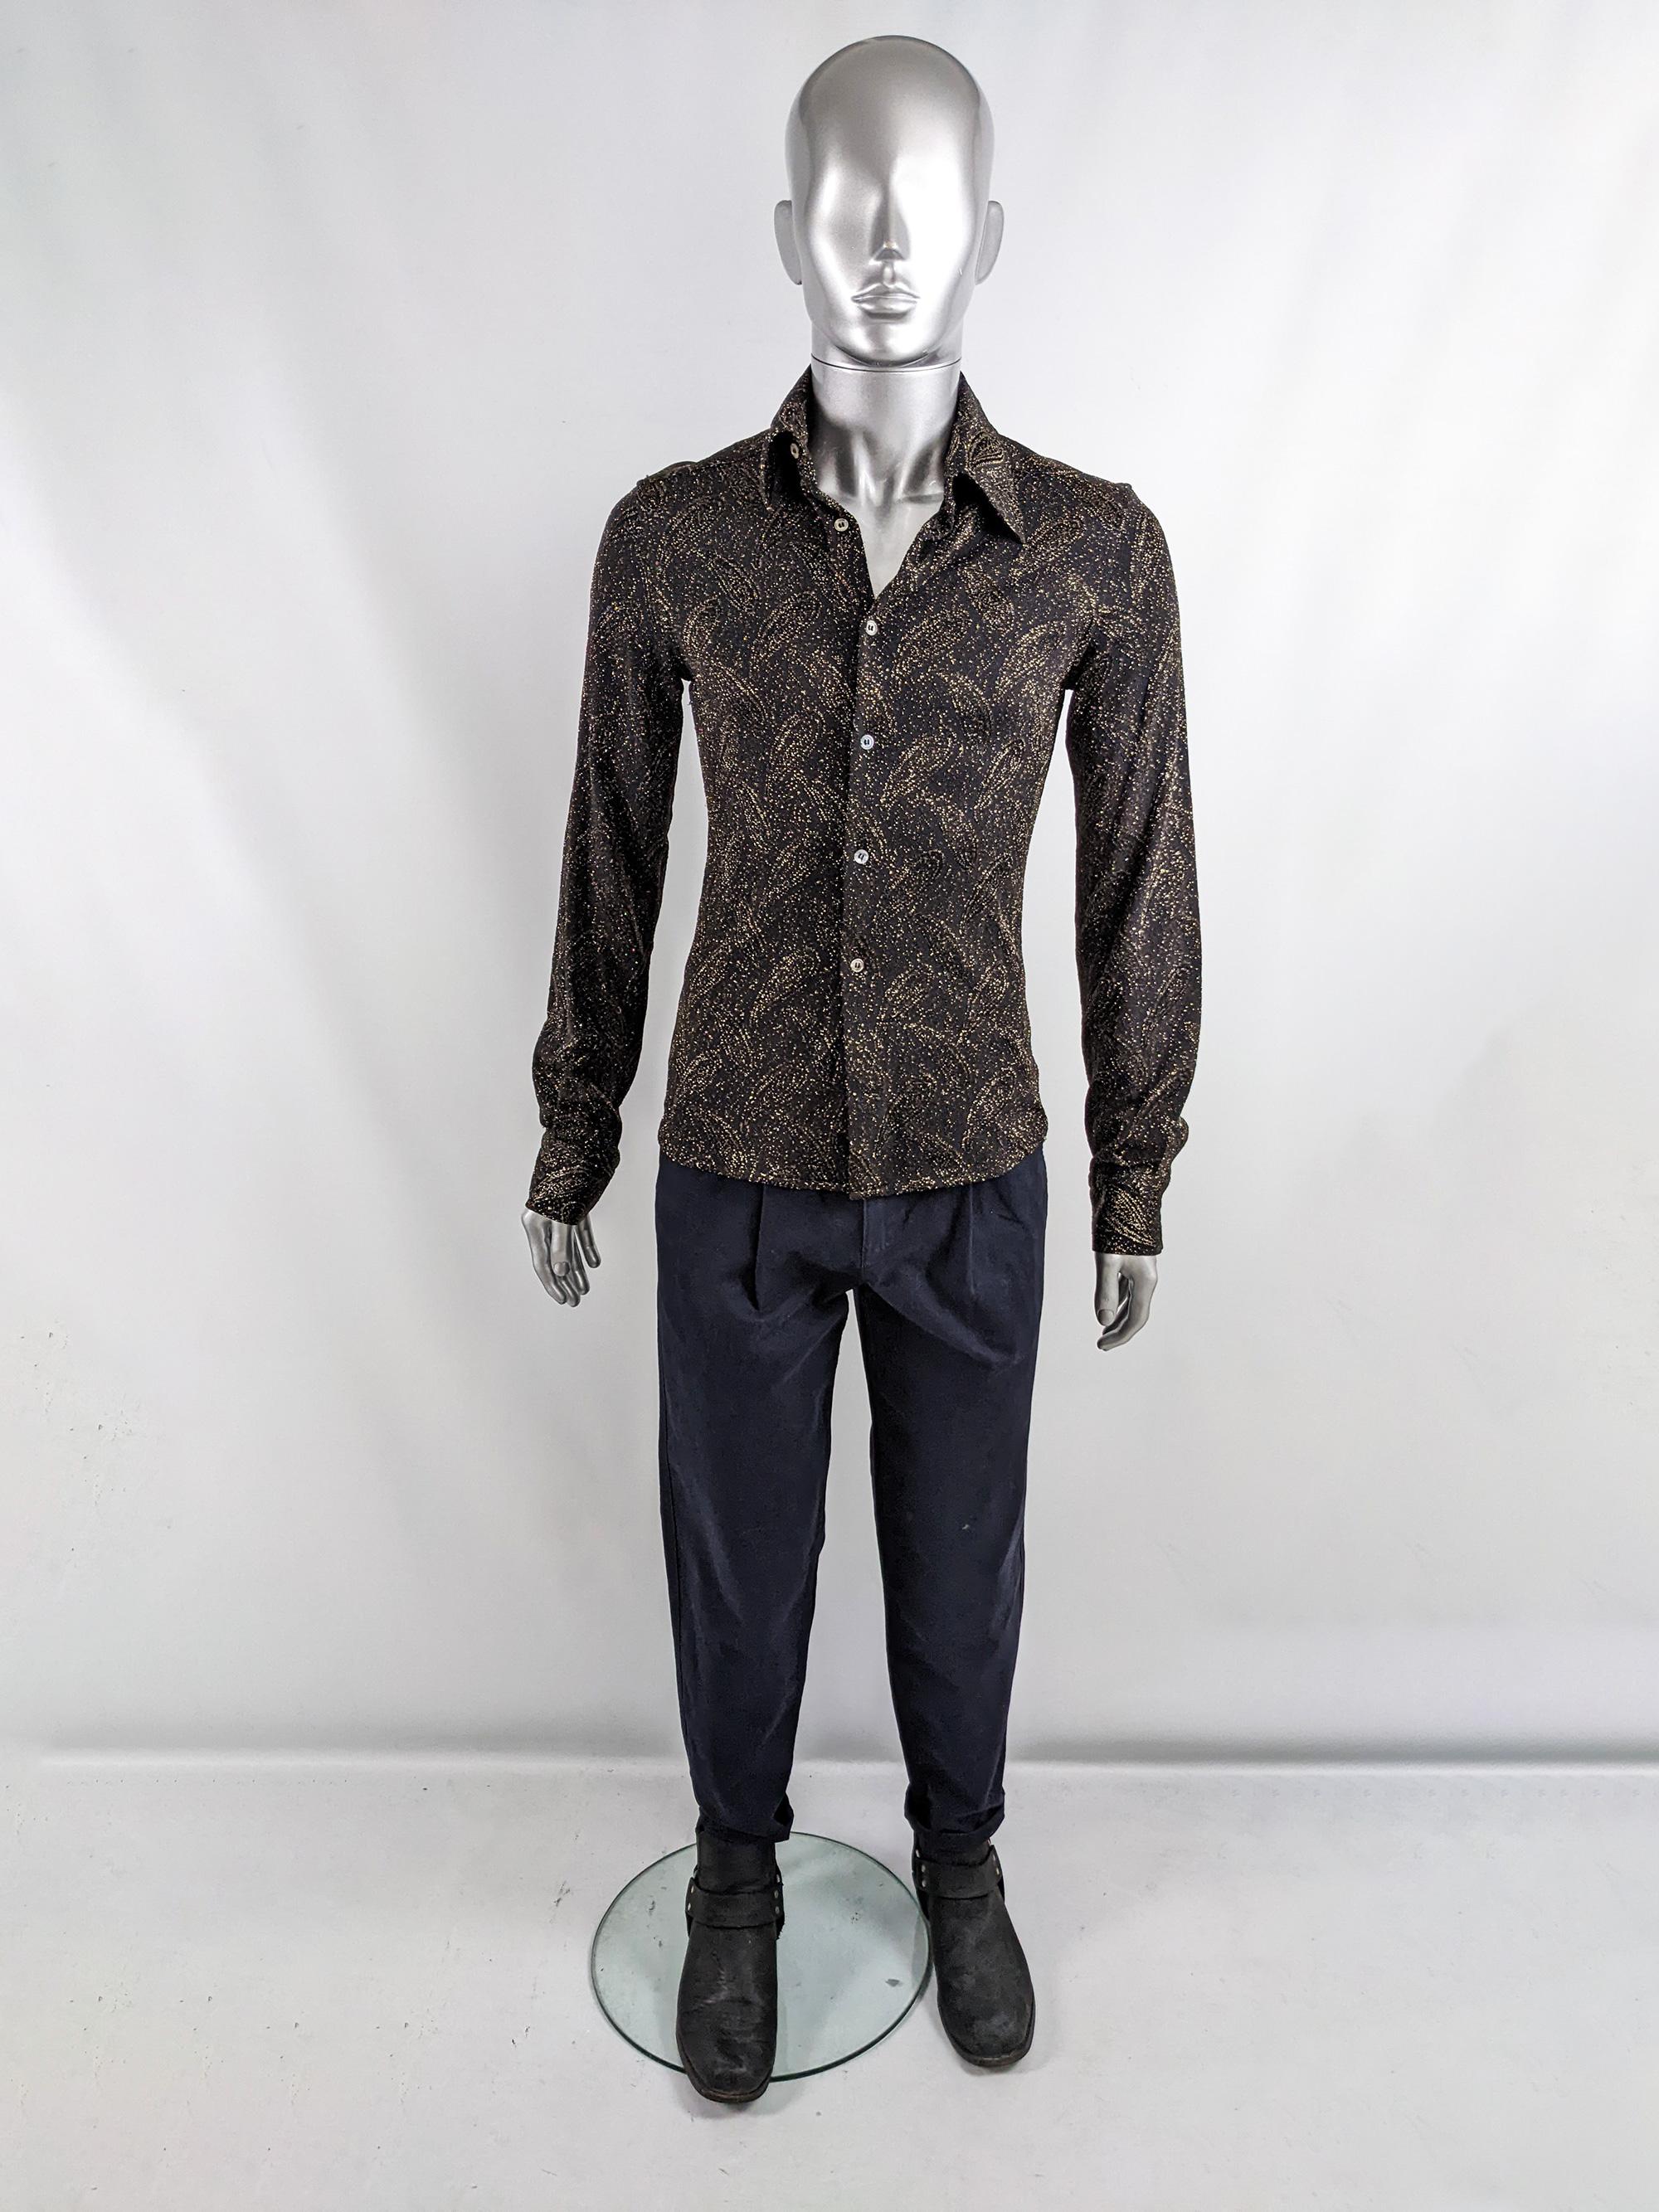 A stylish vintage mens party shirt from the late 90s/ early 2000s by luxury Italian label, Costume National. In a black jersey fabric with a gold lurex brocade throughout creating a 70s style paisley pattern. It has long sleeves and mother of pearl